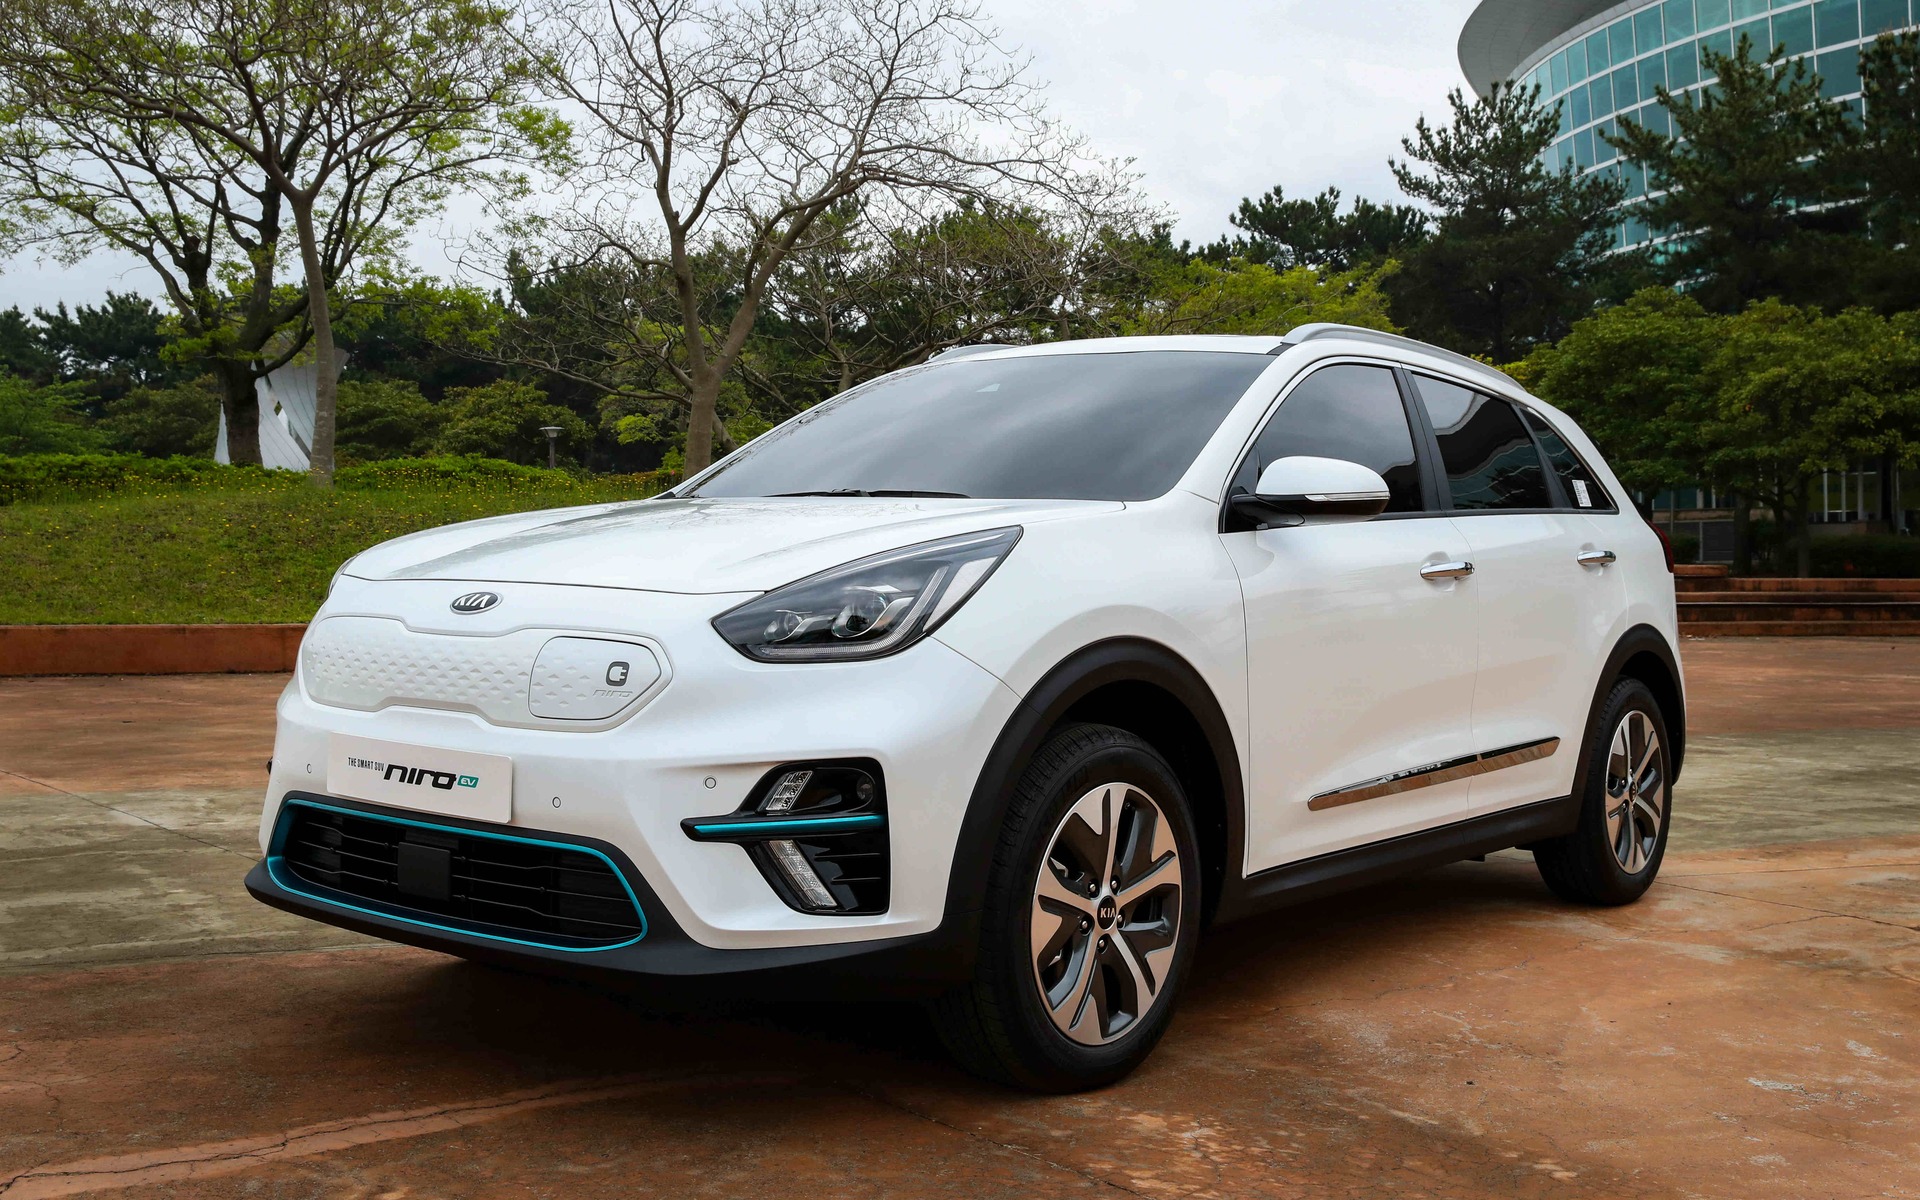 rollen Slink Kiezelsteen All-New Kia Niro EV is Unveiled with Up to 380 km of Range - The Car Guide